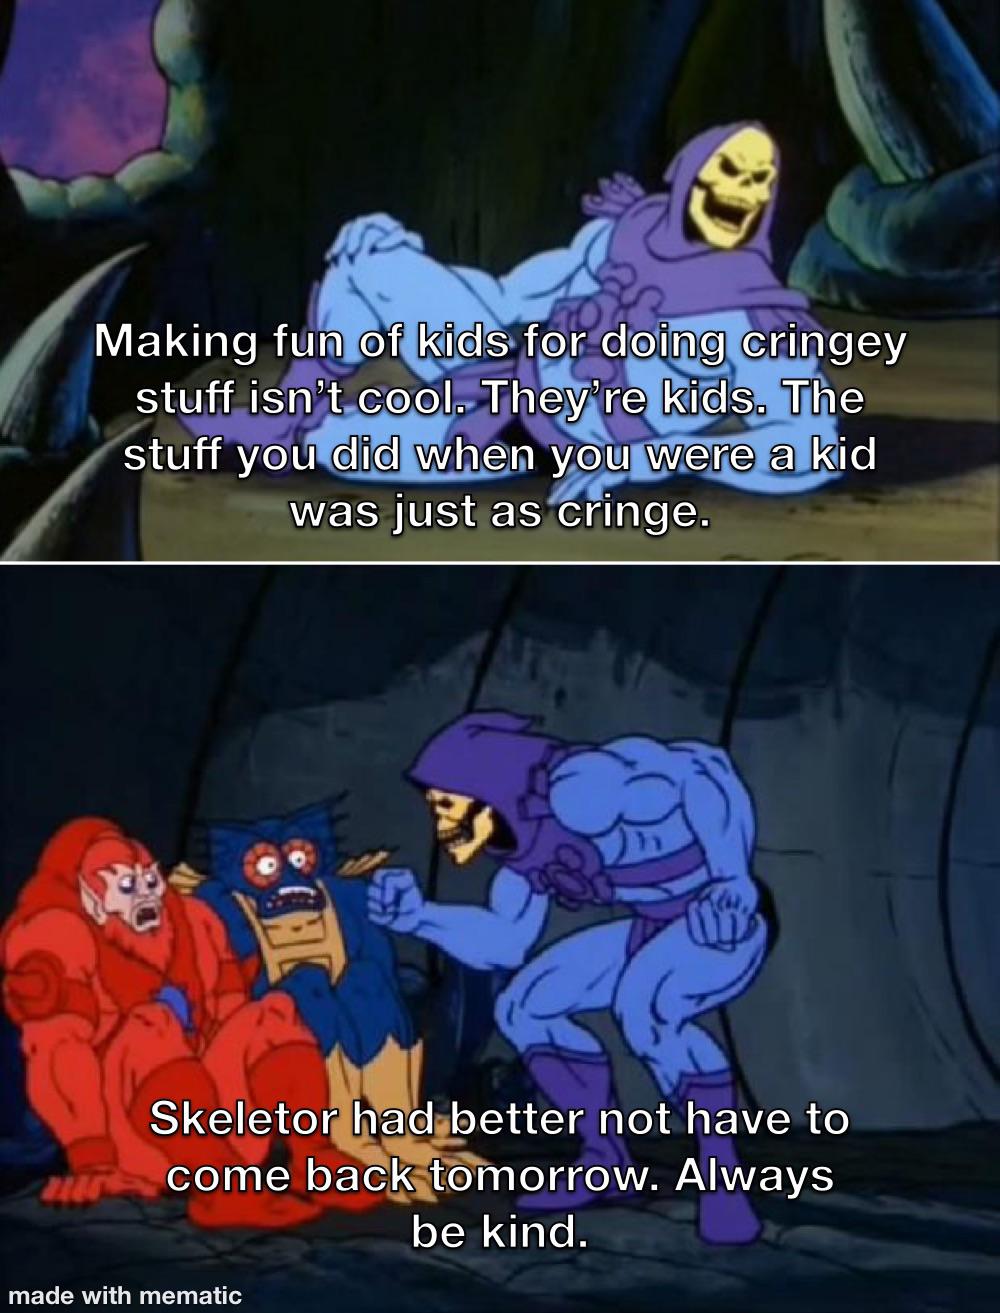 skeletor facts meme - Making fun of kids for doing cringey stuff isn't cool. They're kids. The stuff you did when you were a kid was just as cringe. Skeletor had better not have to zur come back tomorrow. Always be kind. made with mematic